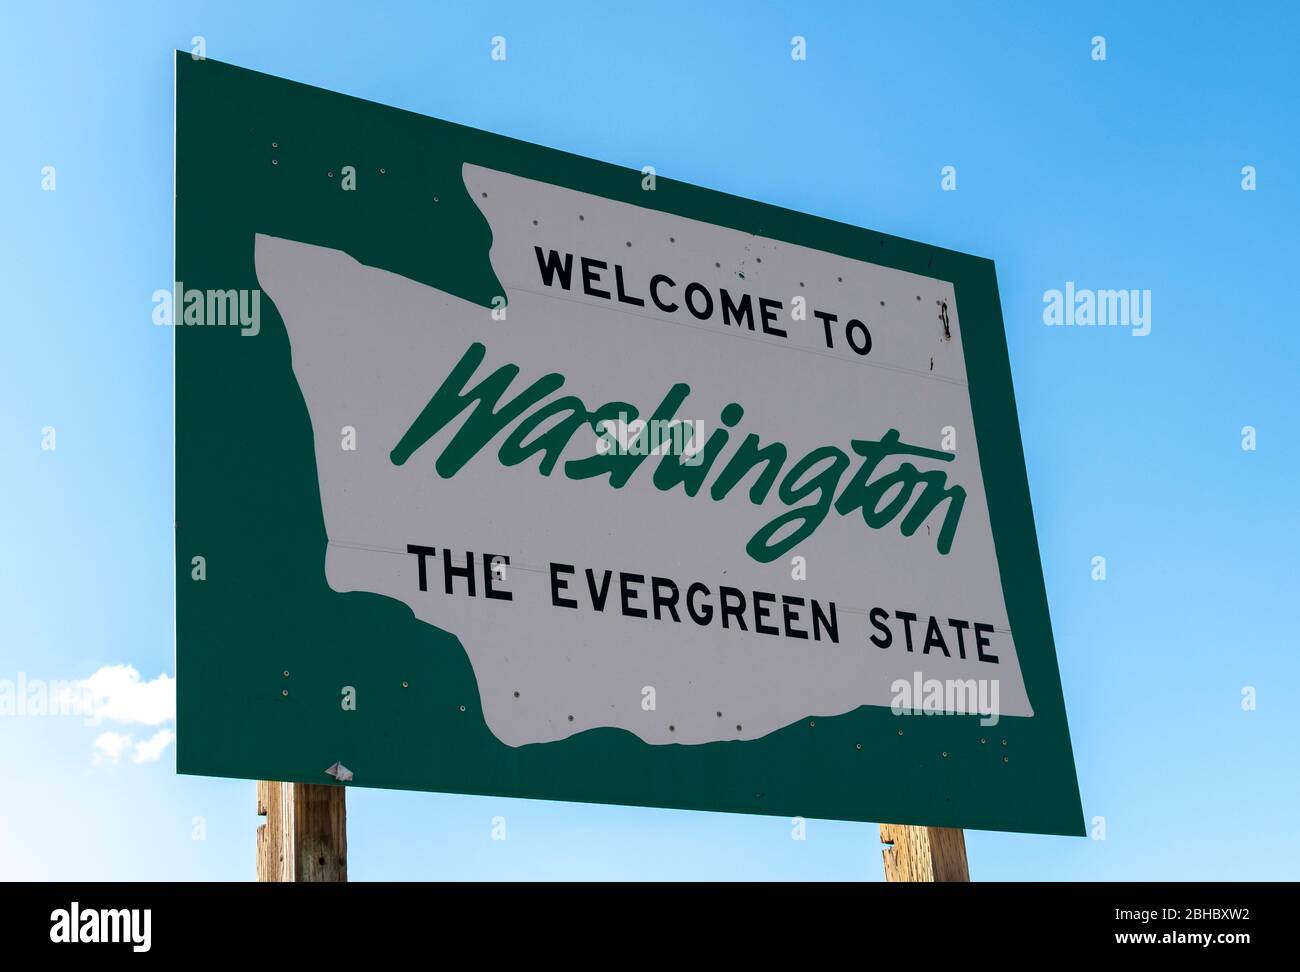 A roadside sign with welcome to Washington State, the evergreen state written on it with a blue sky behind. Stock Photo